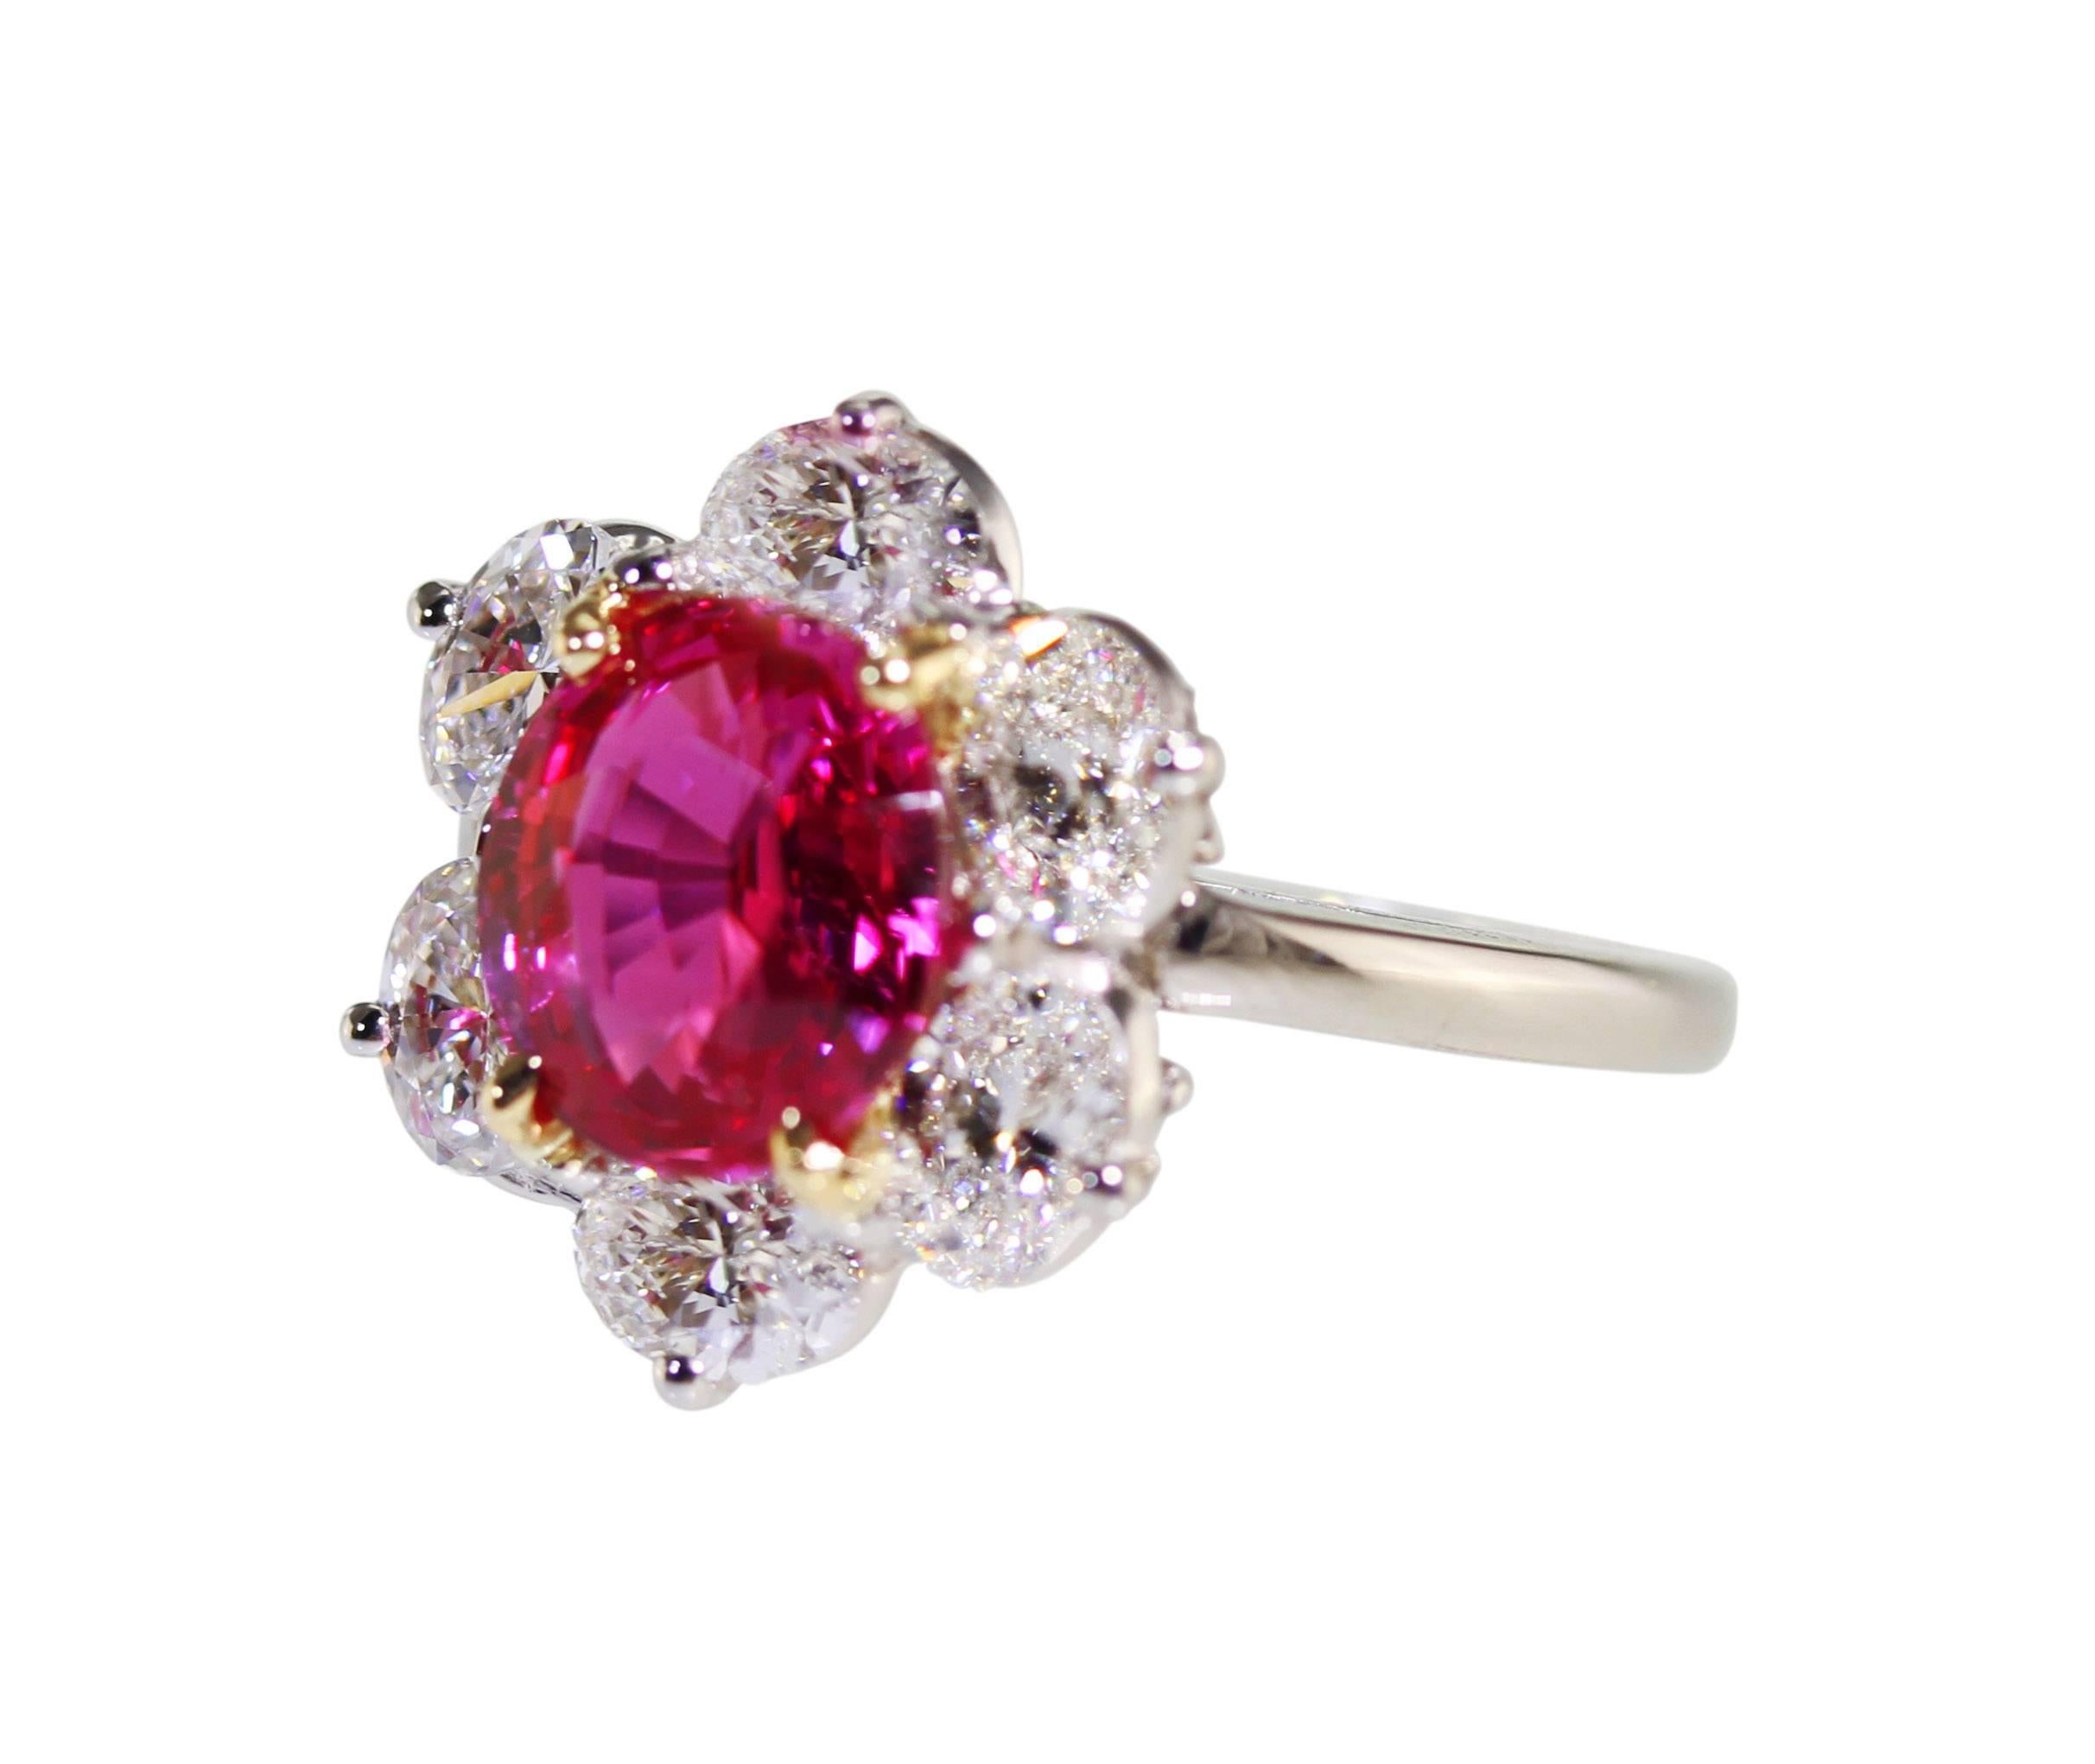 A platinum, 18 karat gold, pink sapphire and diamond ring by Oscar Heyman,  & Brothers, set in the center with an oval pink sapphire weighing 3.31 carats, framed by 6 oval diamonds weighing 1.97 carats, gross weight 6.5 grams, measuring 5/8 by 3/4